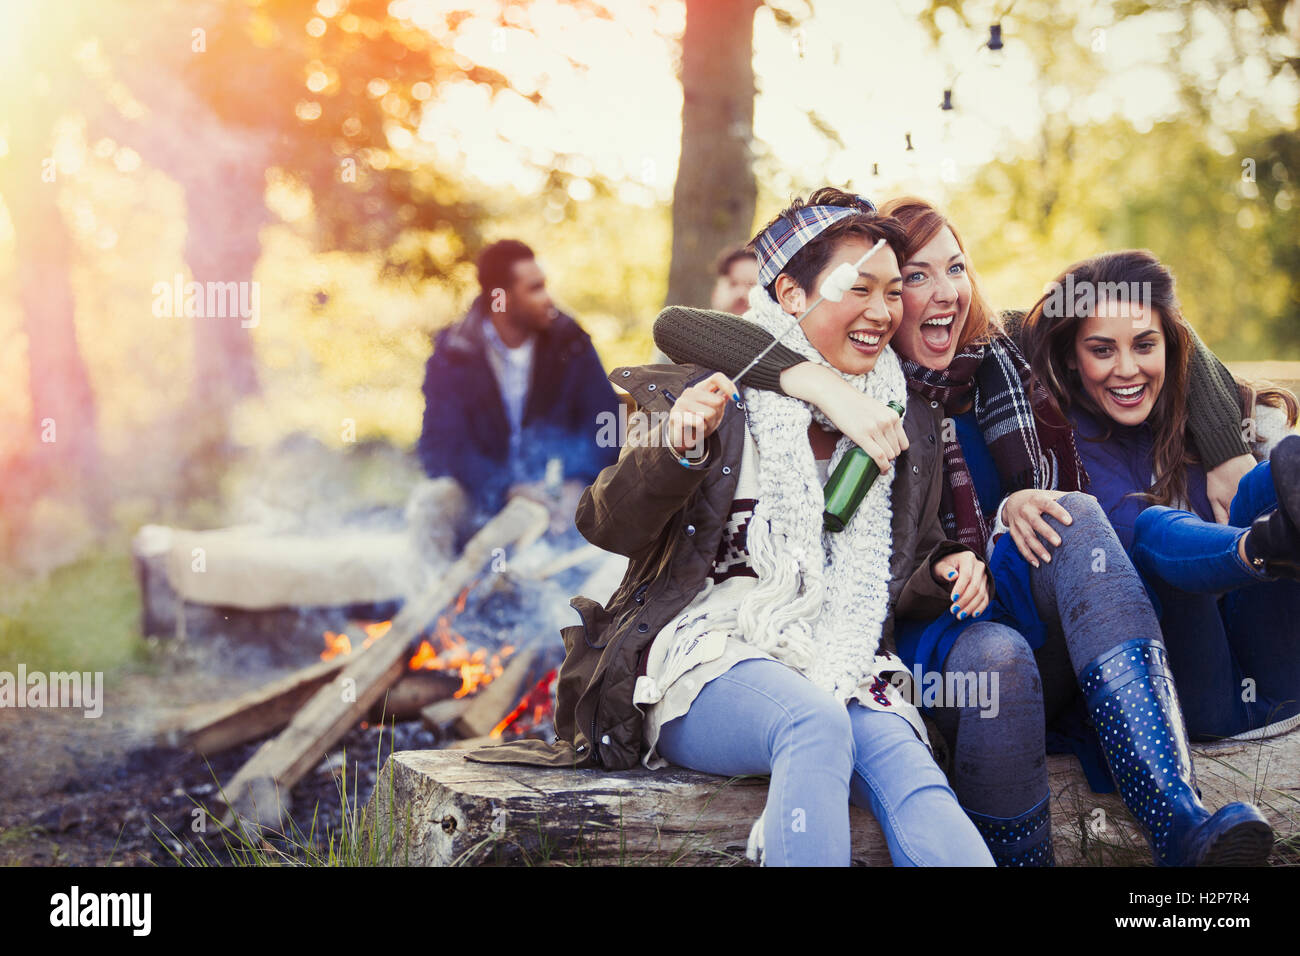 Friends laughing roasting marshmallows at campfire Stock Photo